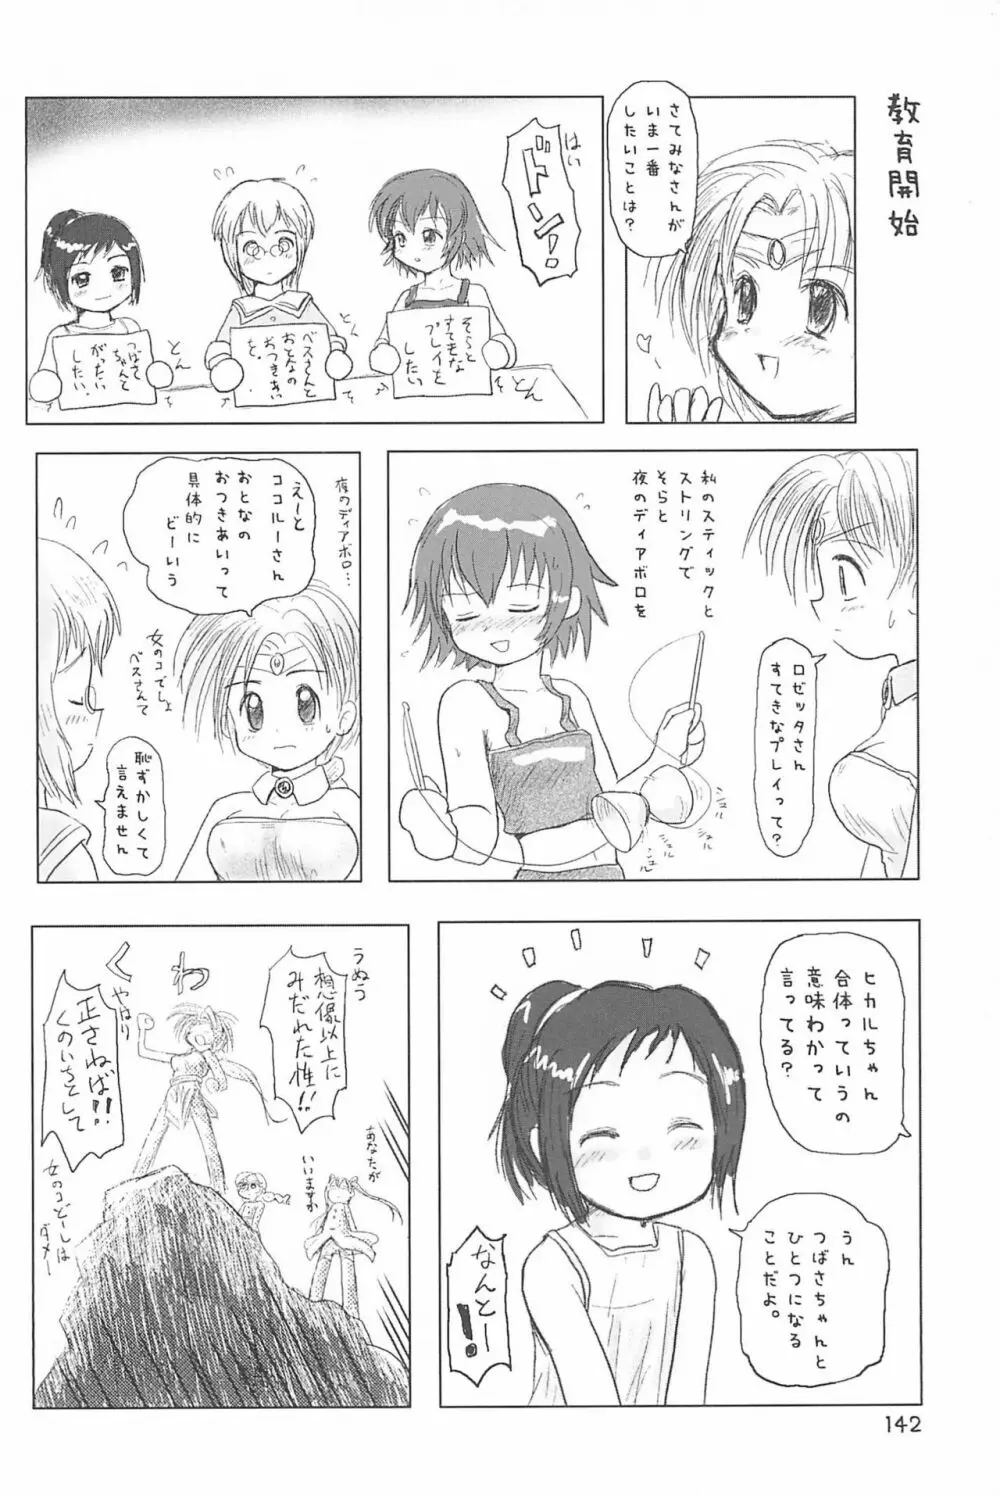 ND-special Volume 4 142ページ